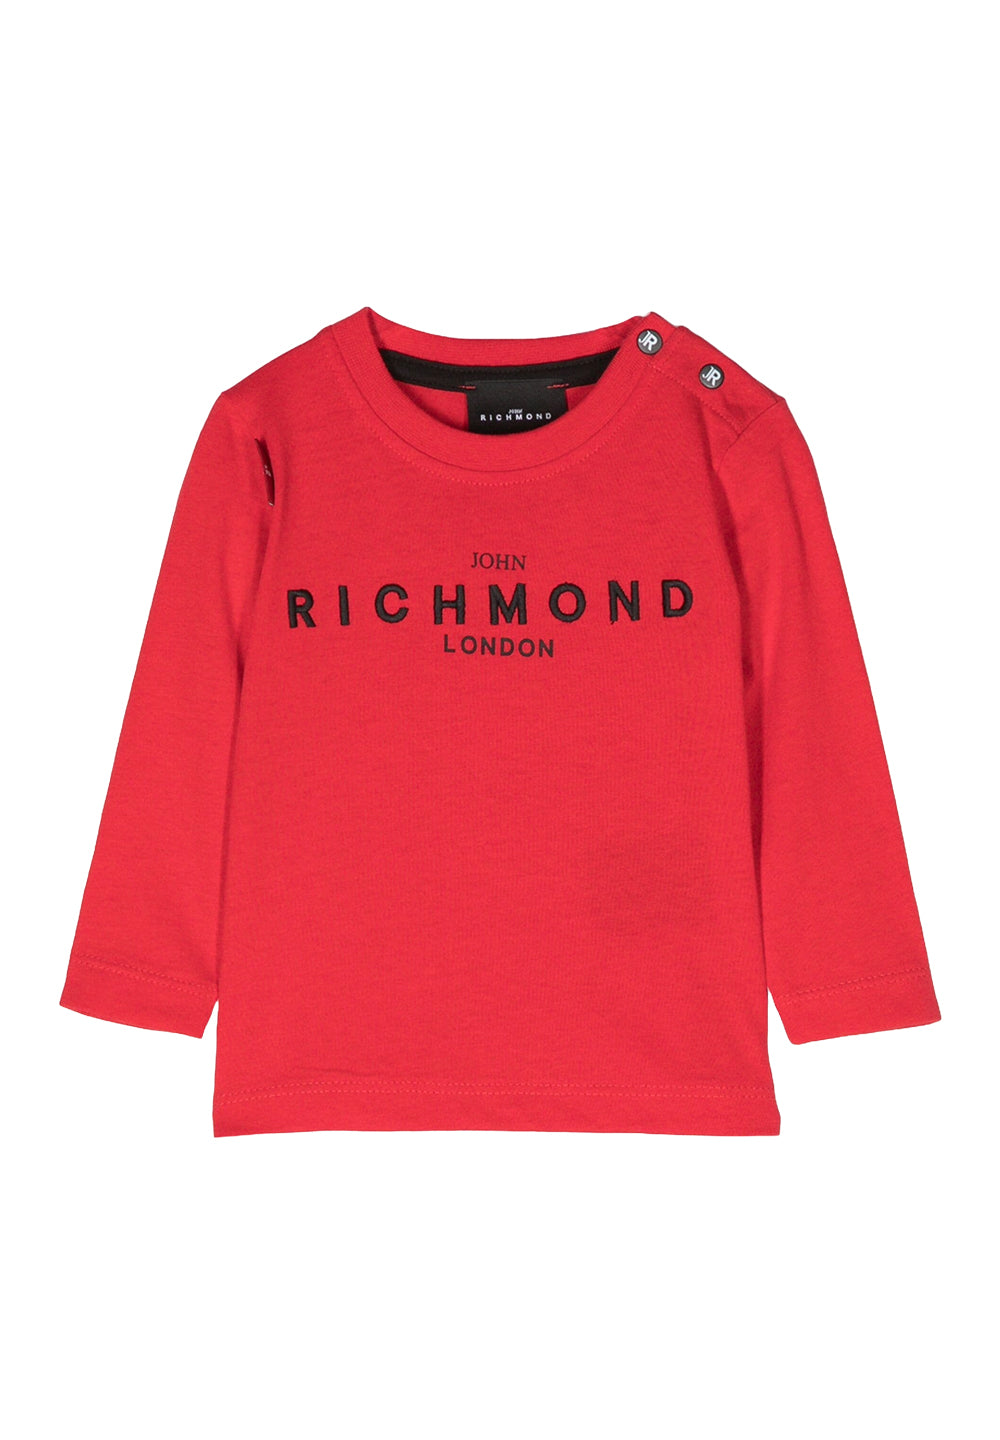 Red t-shirt for boy